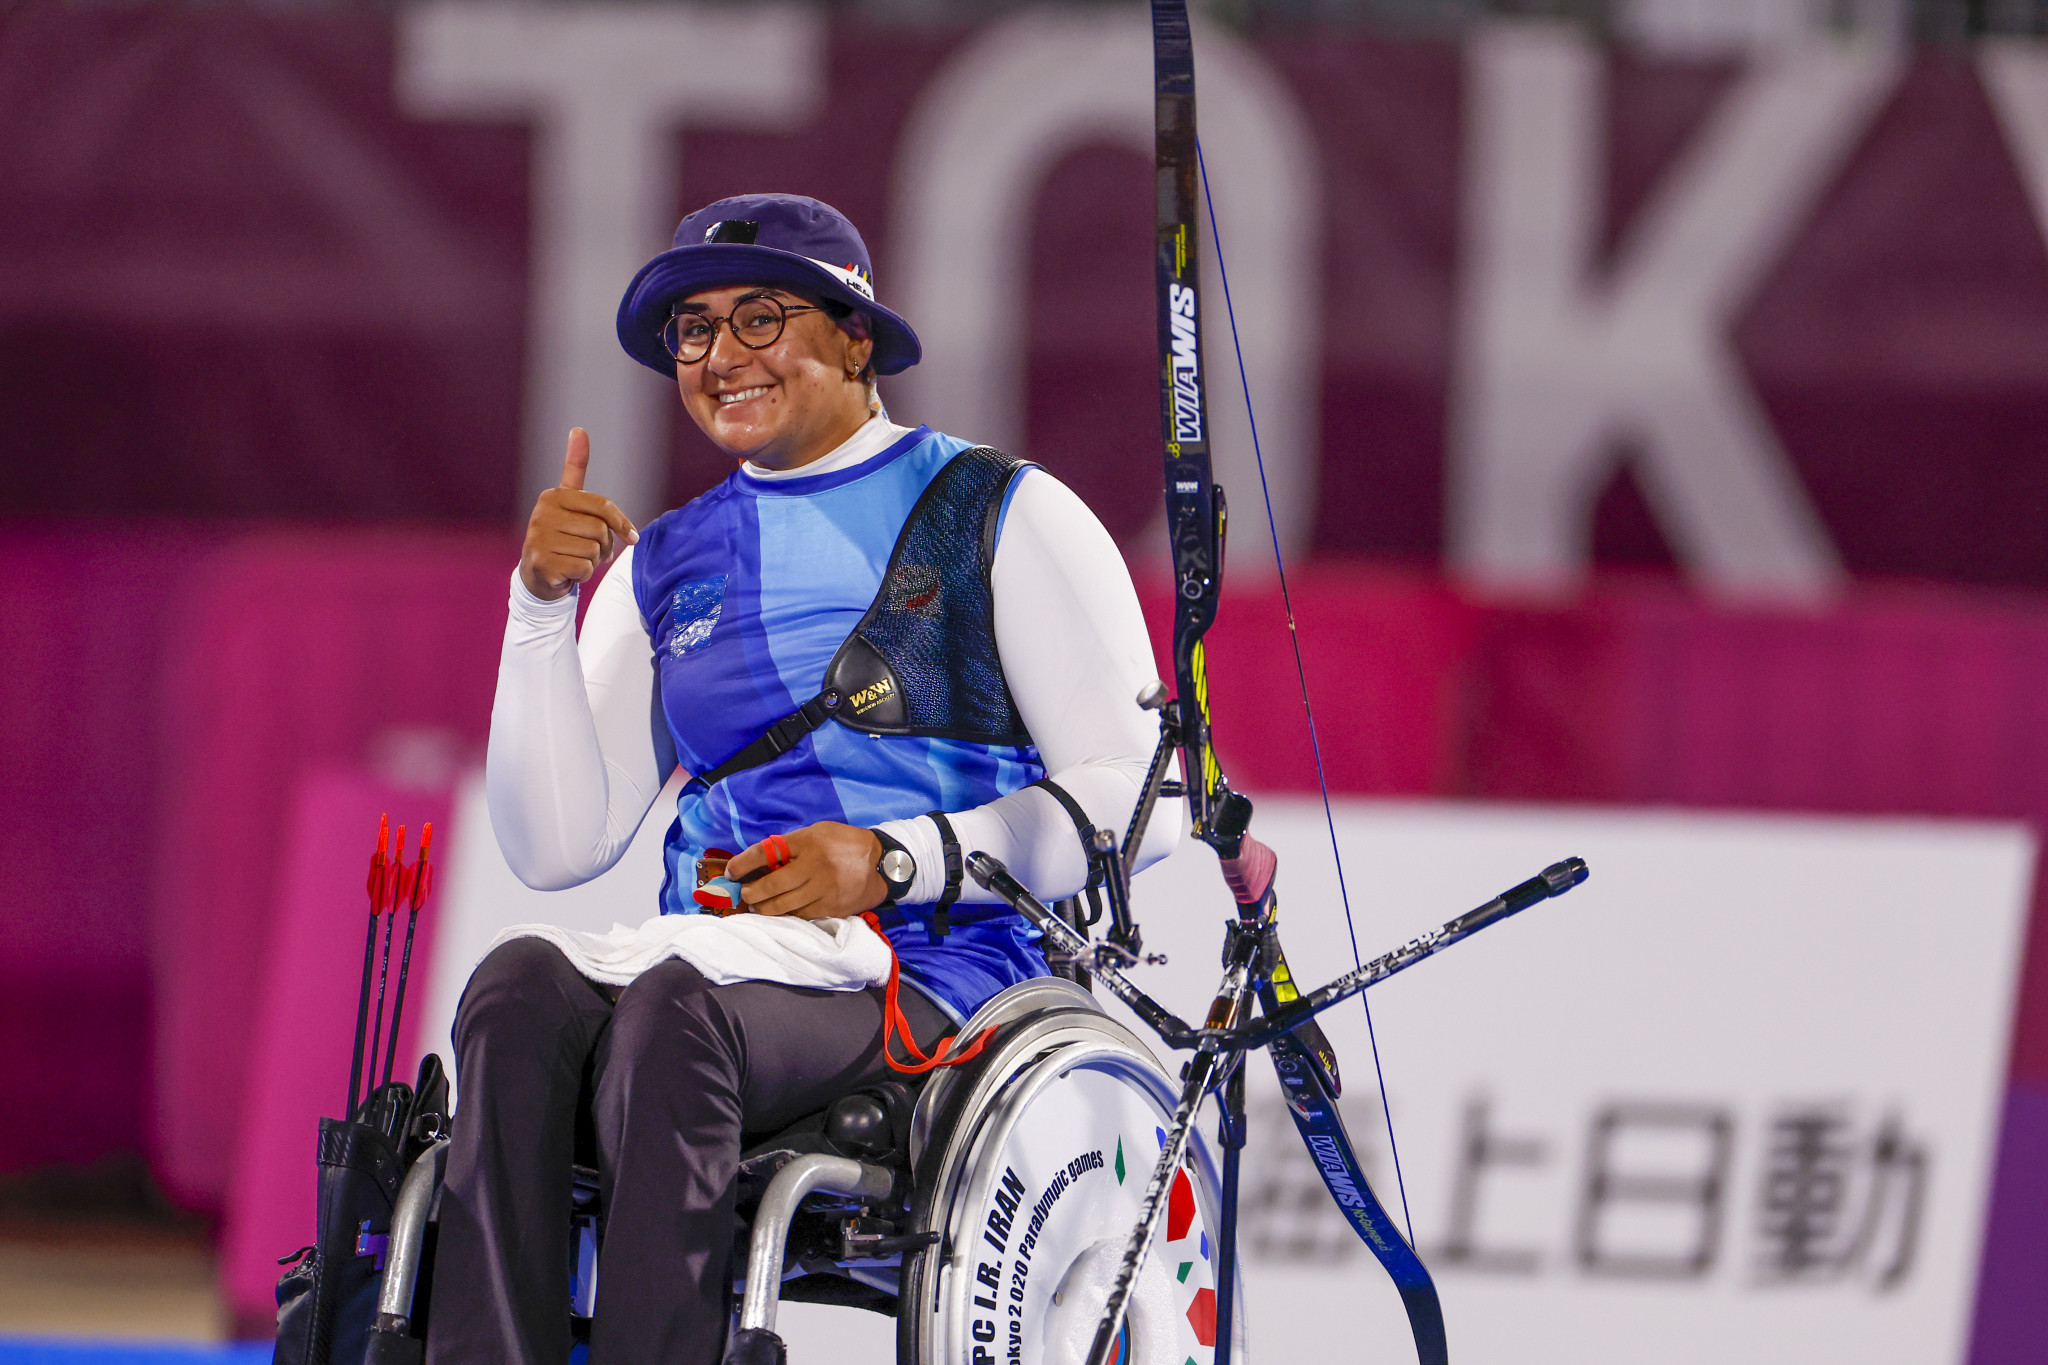 Nemati wins women's individual recurve archery gold for third time at Tokyo 2020